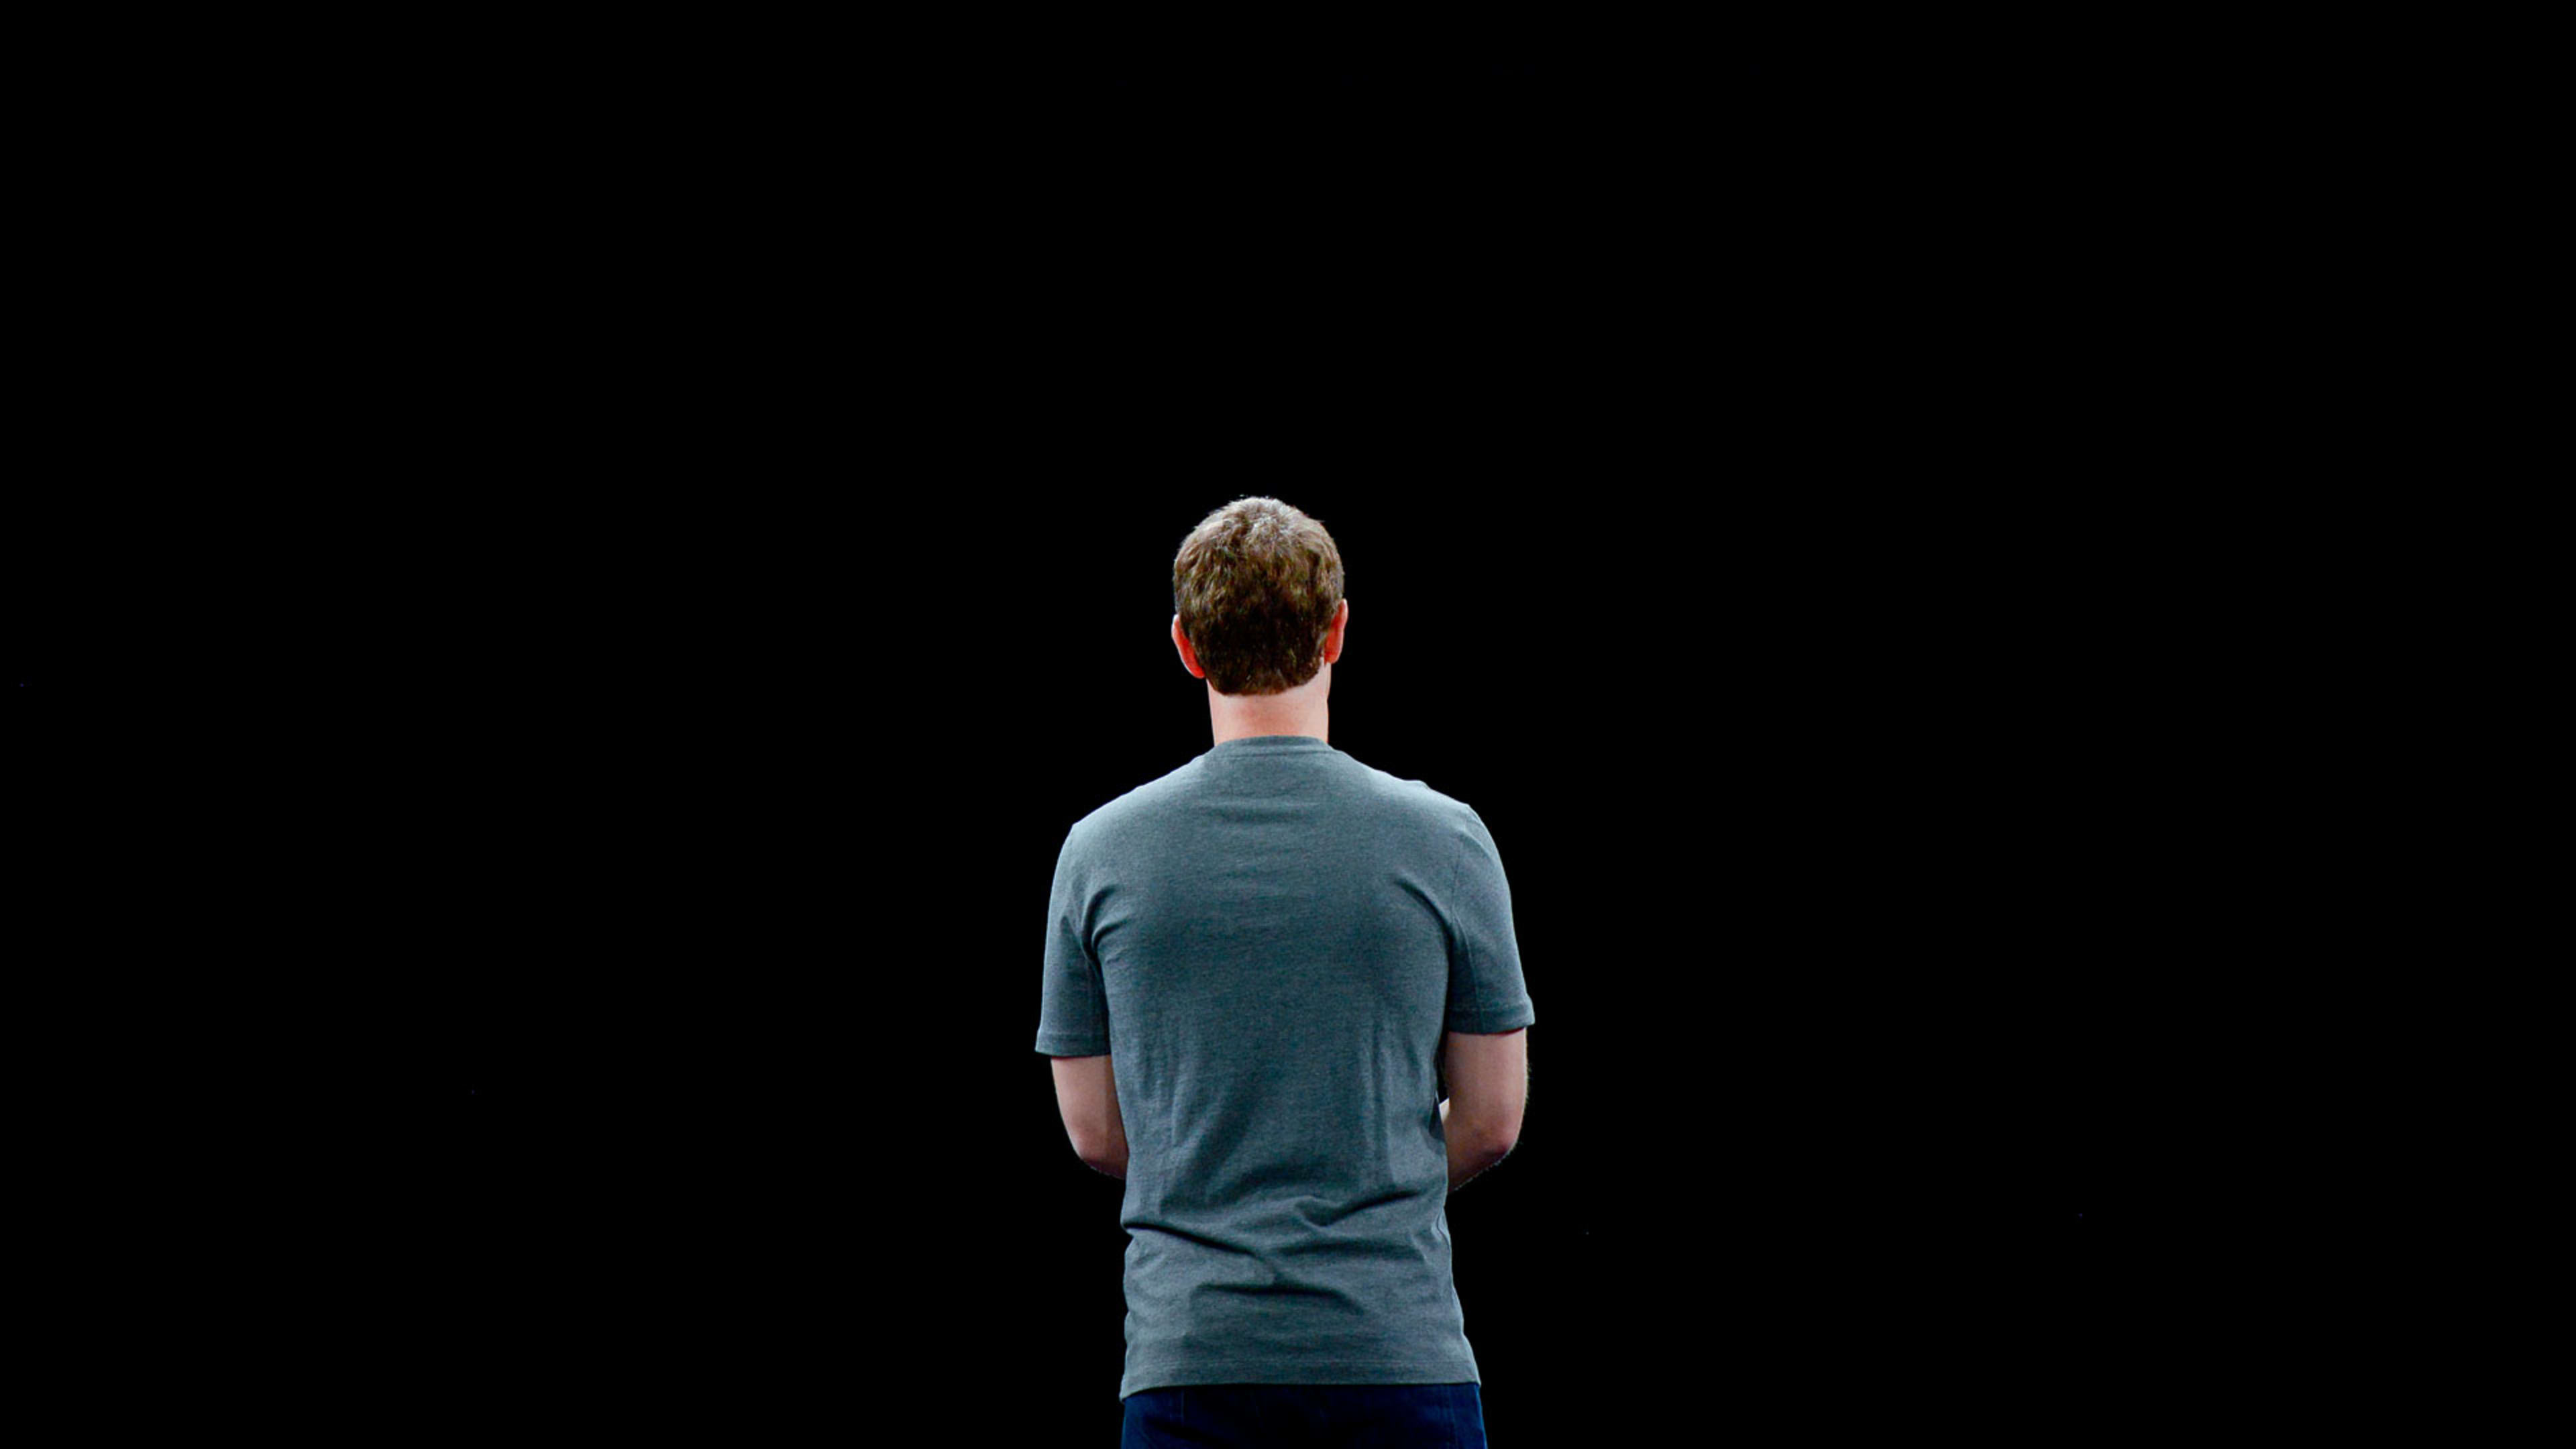 Mark Zuckerberg’s 2018 personal challenge is to do his job as CEO